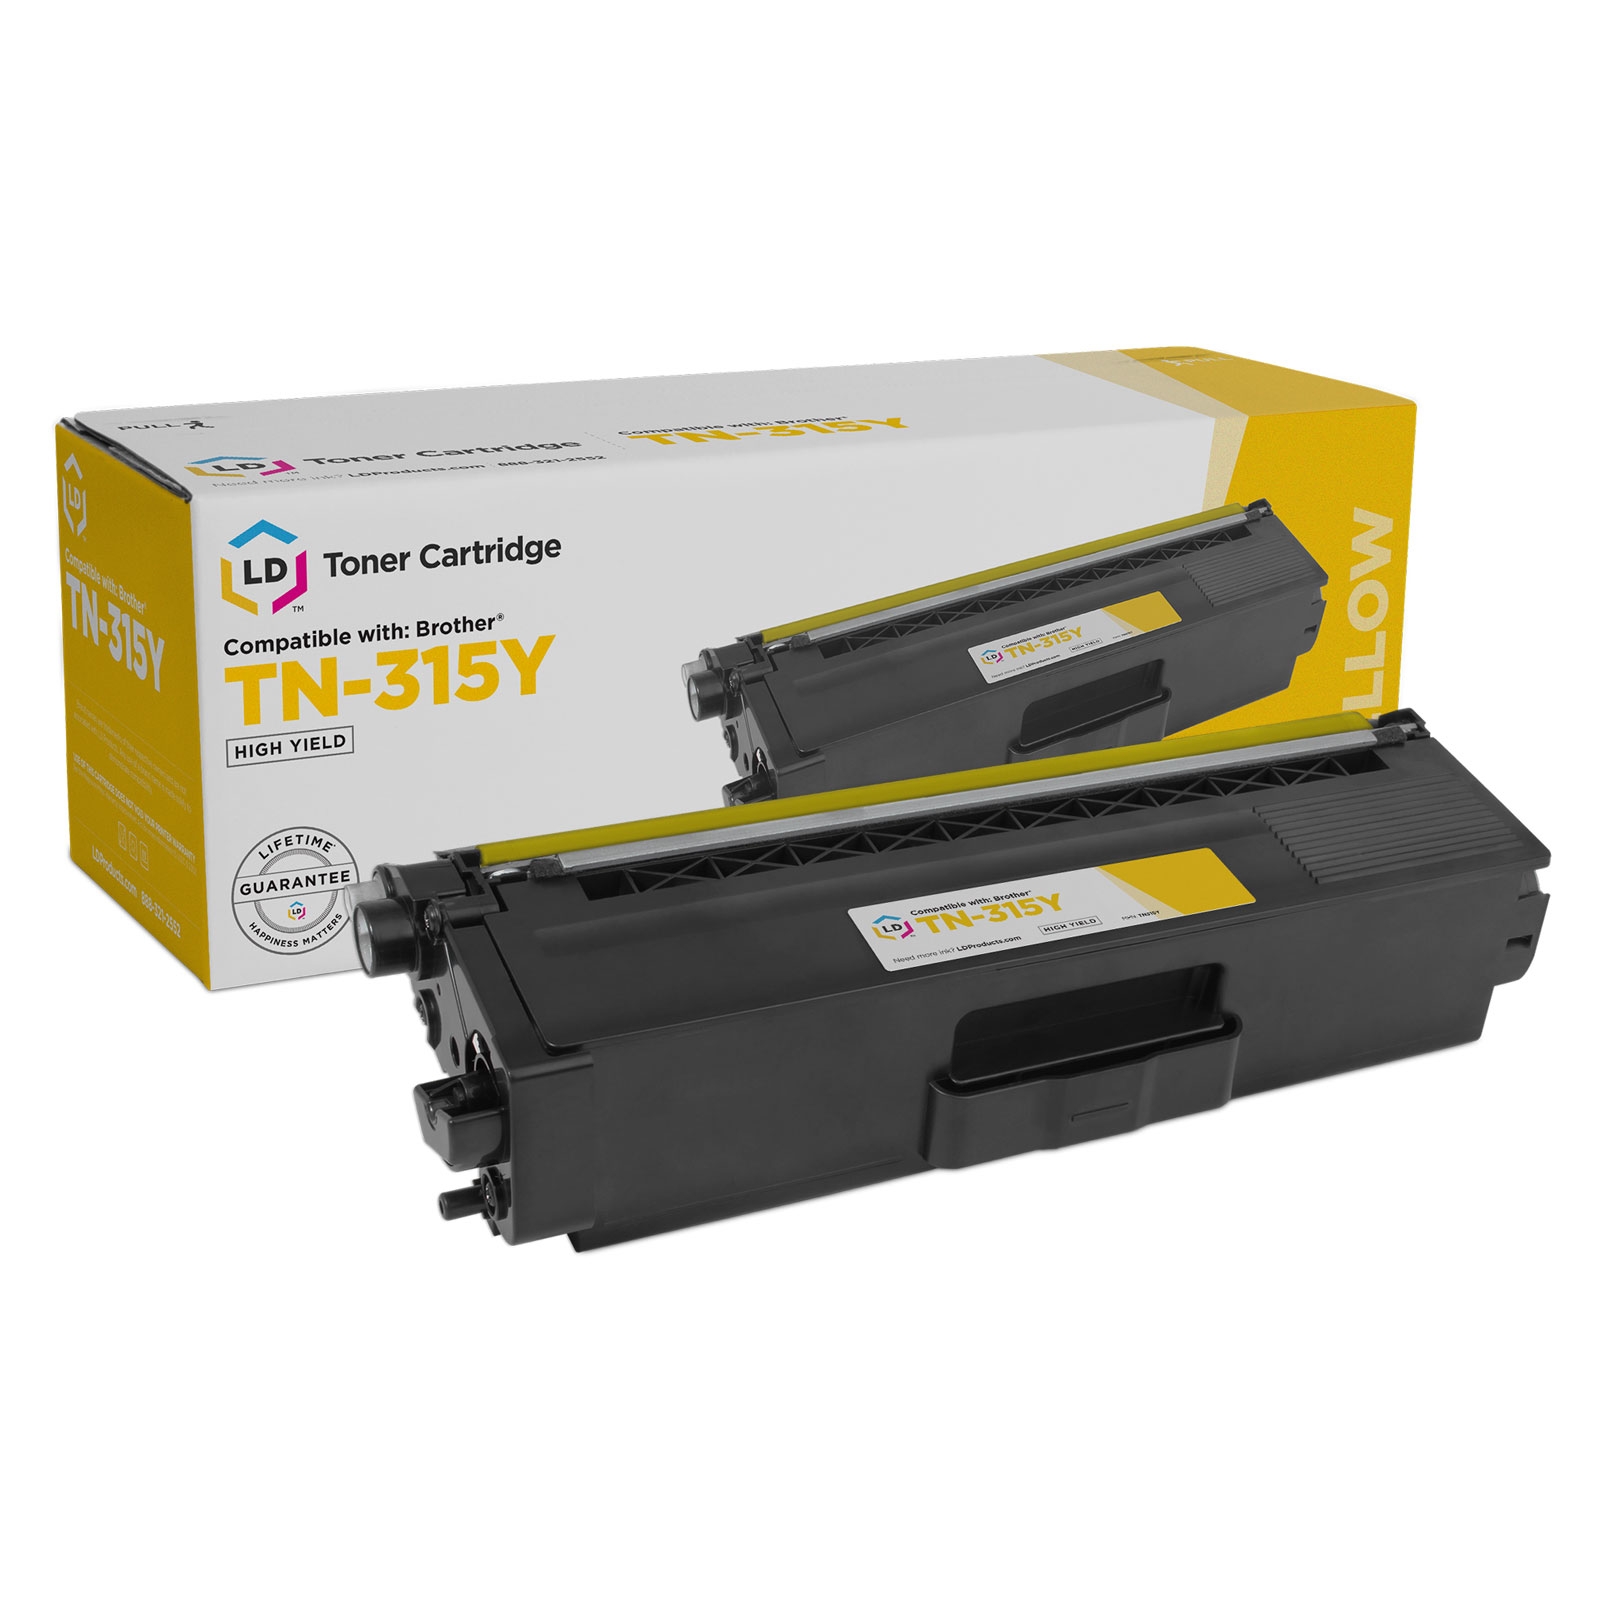 Photos - Ink & Toner Cartridge Brother TN315 Laser - Compatible HY Yellow TN315Y 